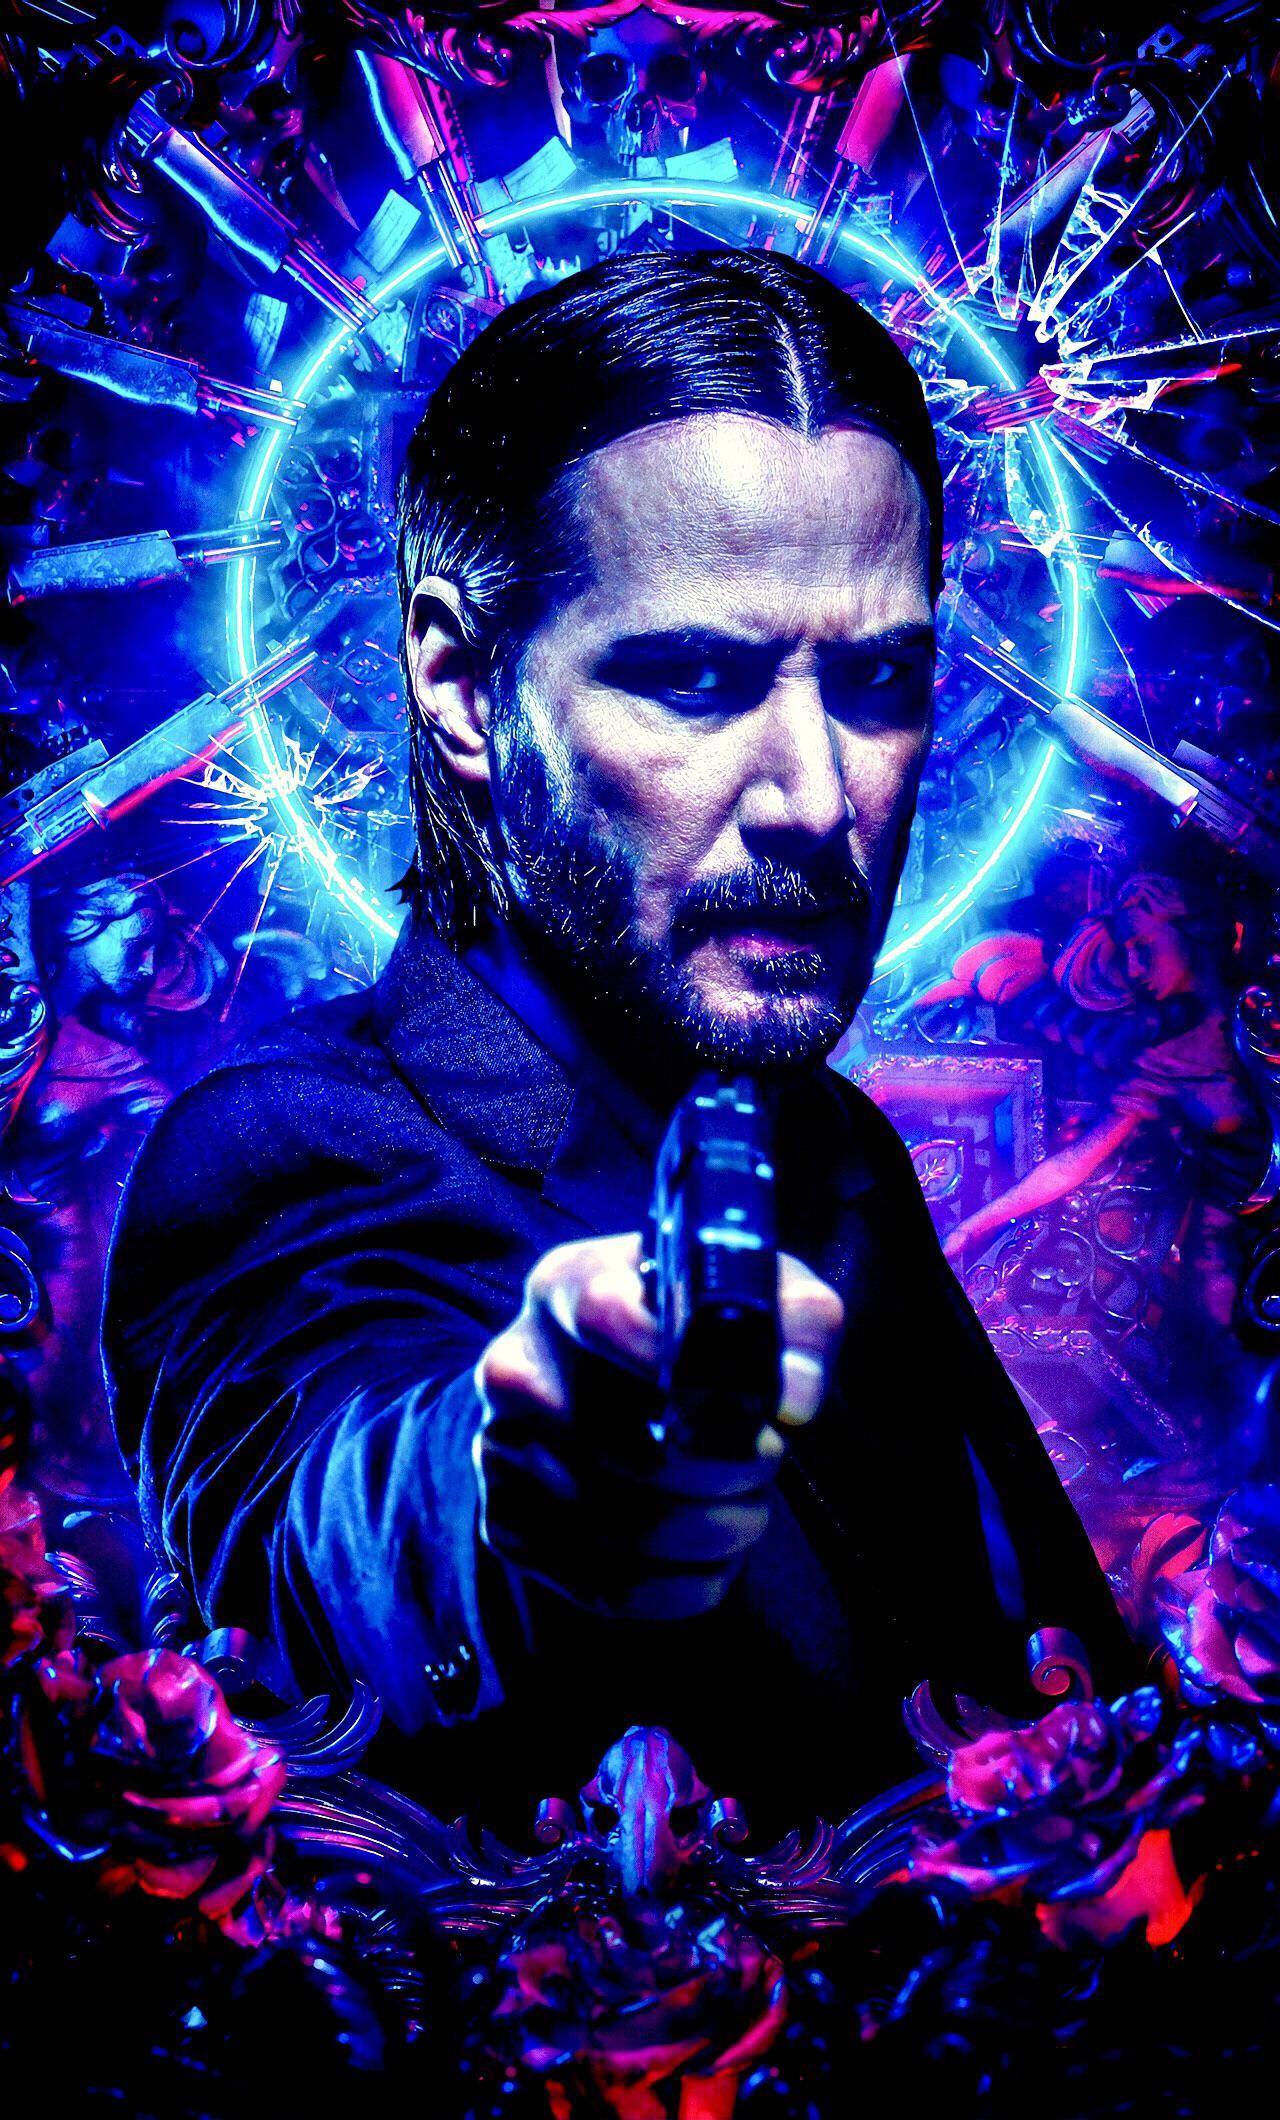 I thought you guys might like this wallpaper of Keanu I